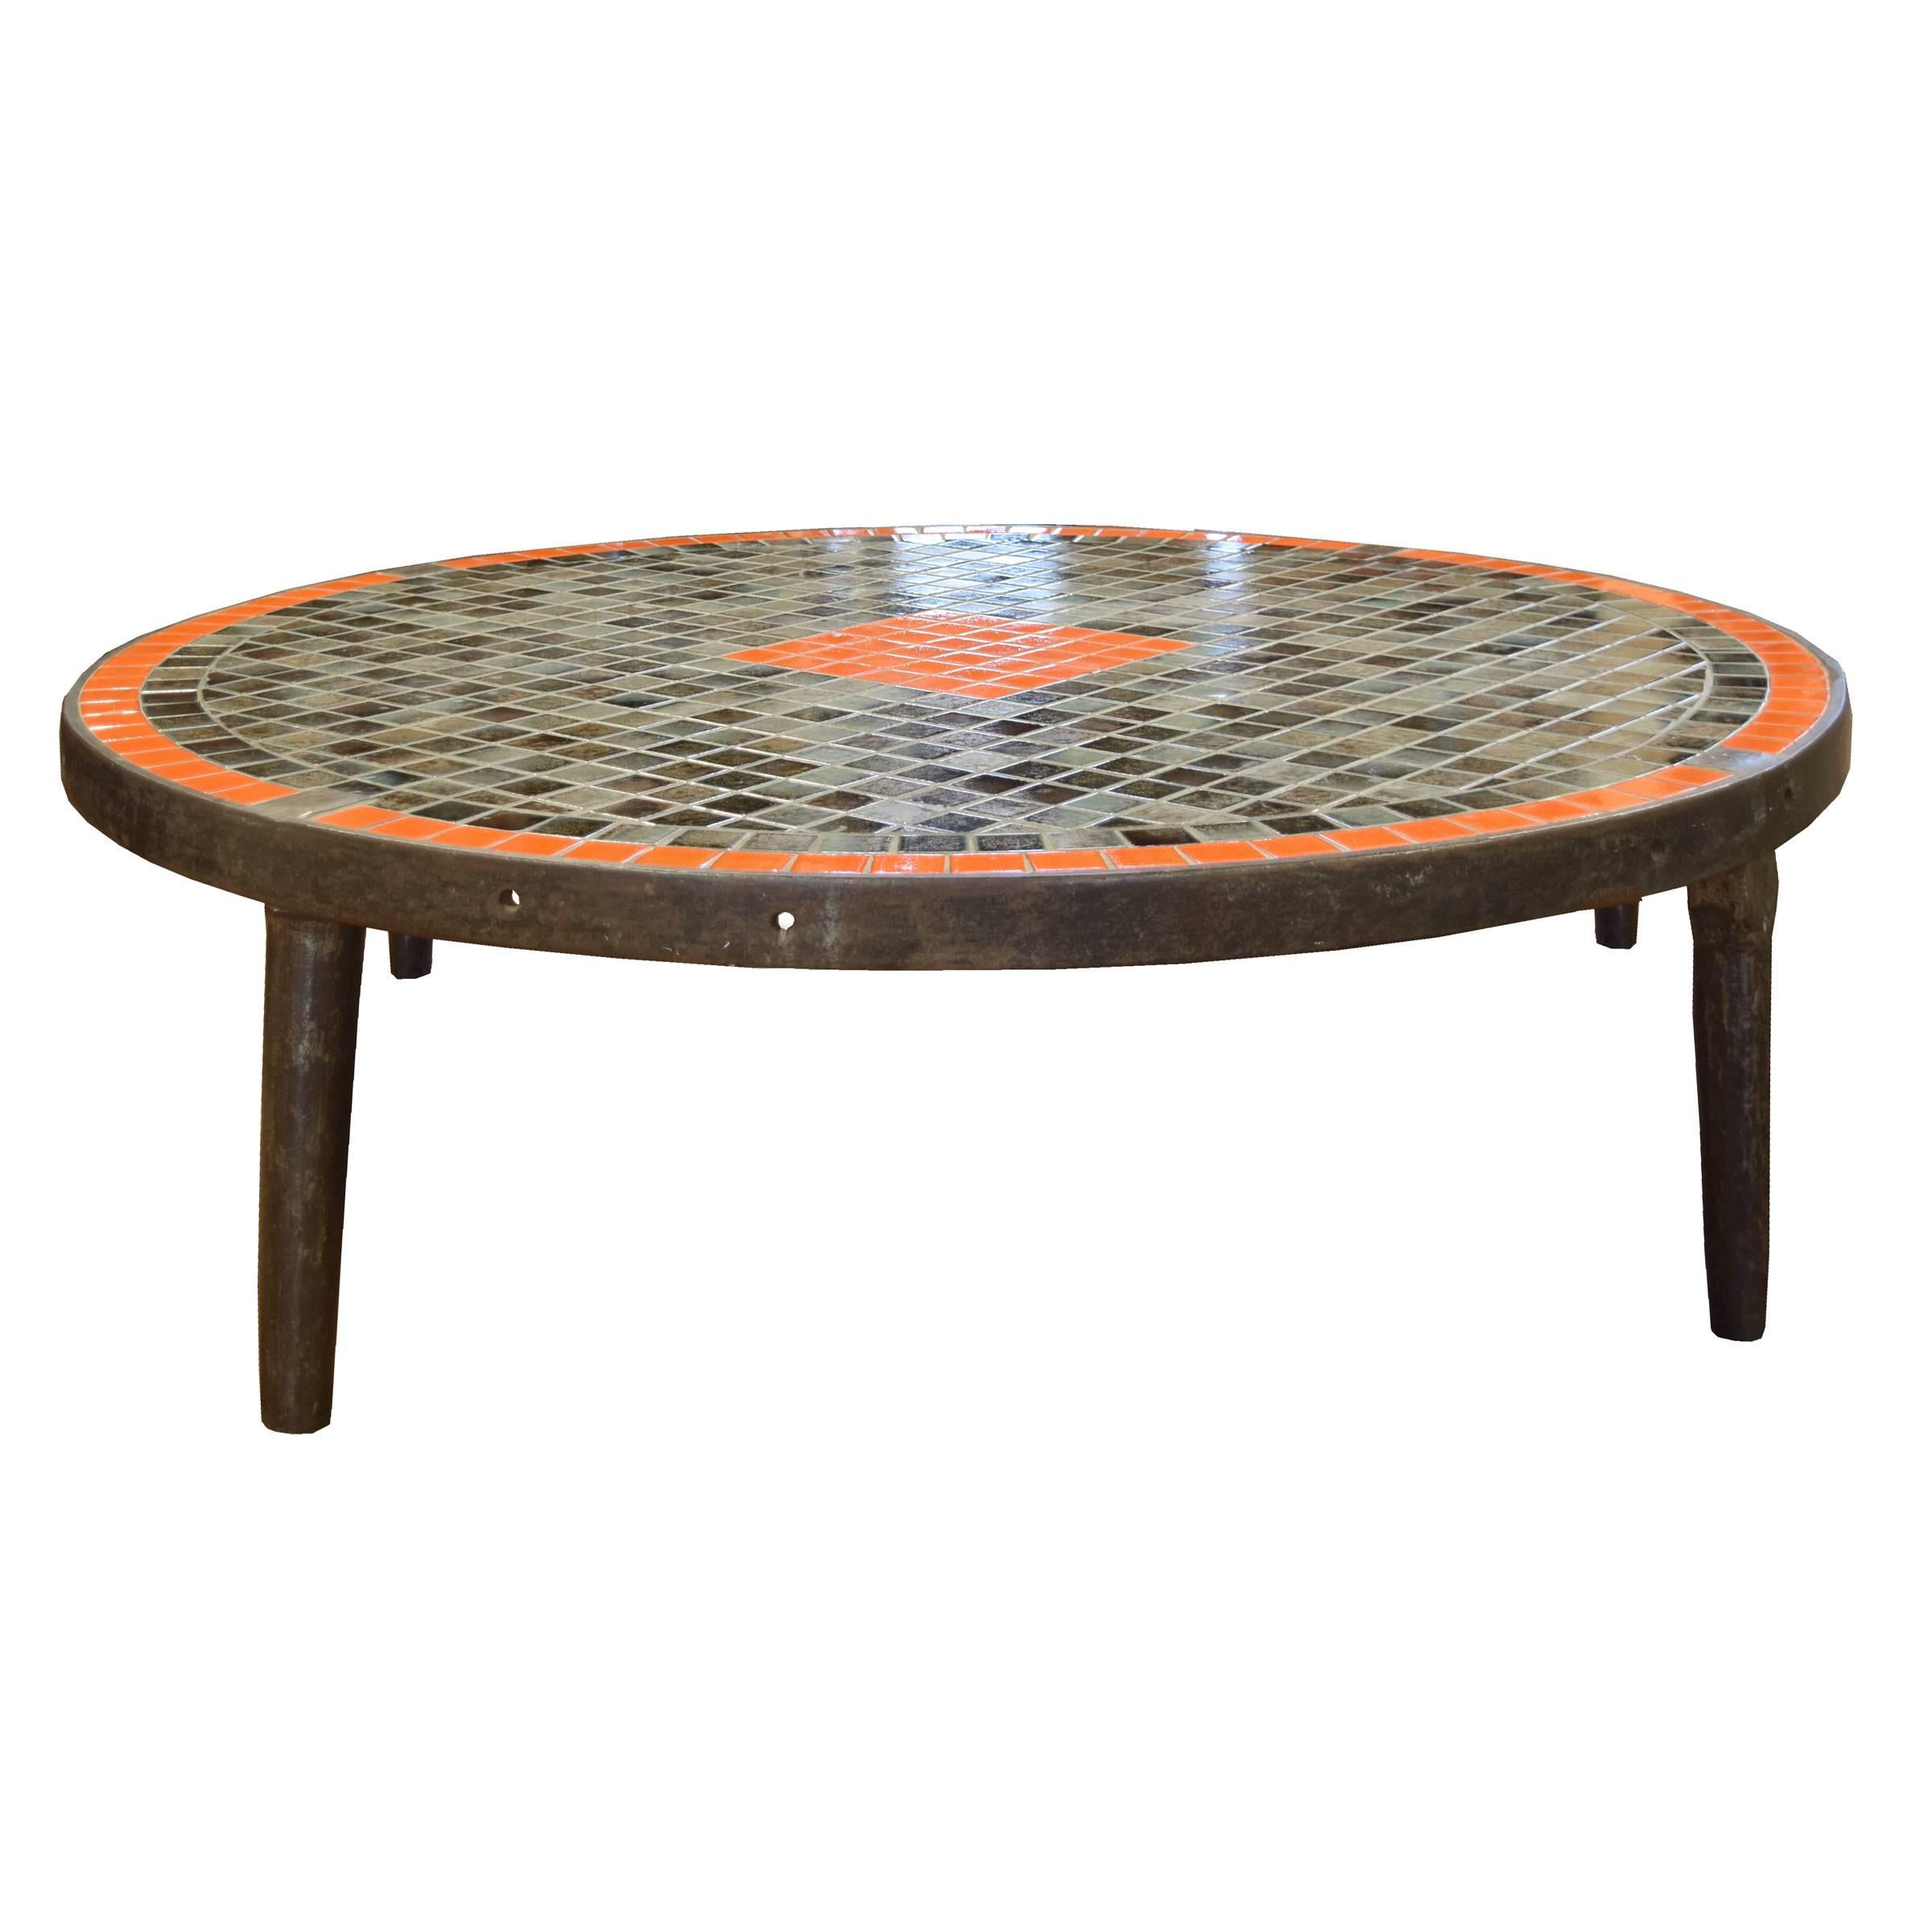 A fantastic midcentury round coffee table with a mosaic tile top and an iron base, circa 1960.